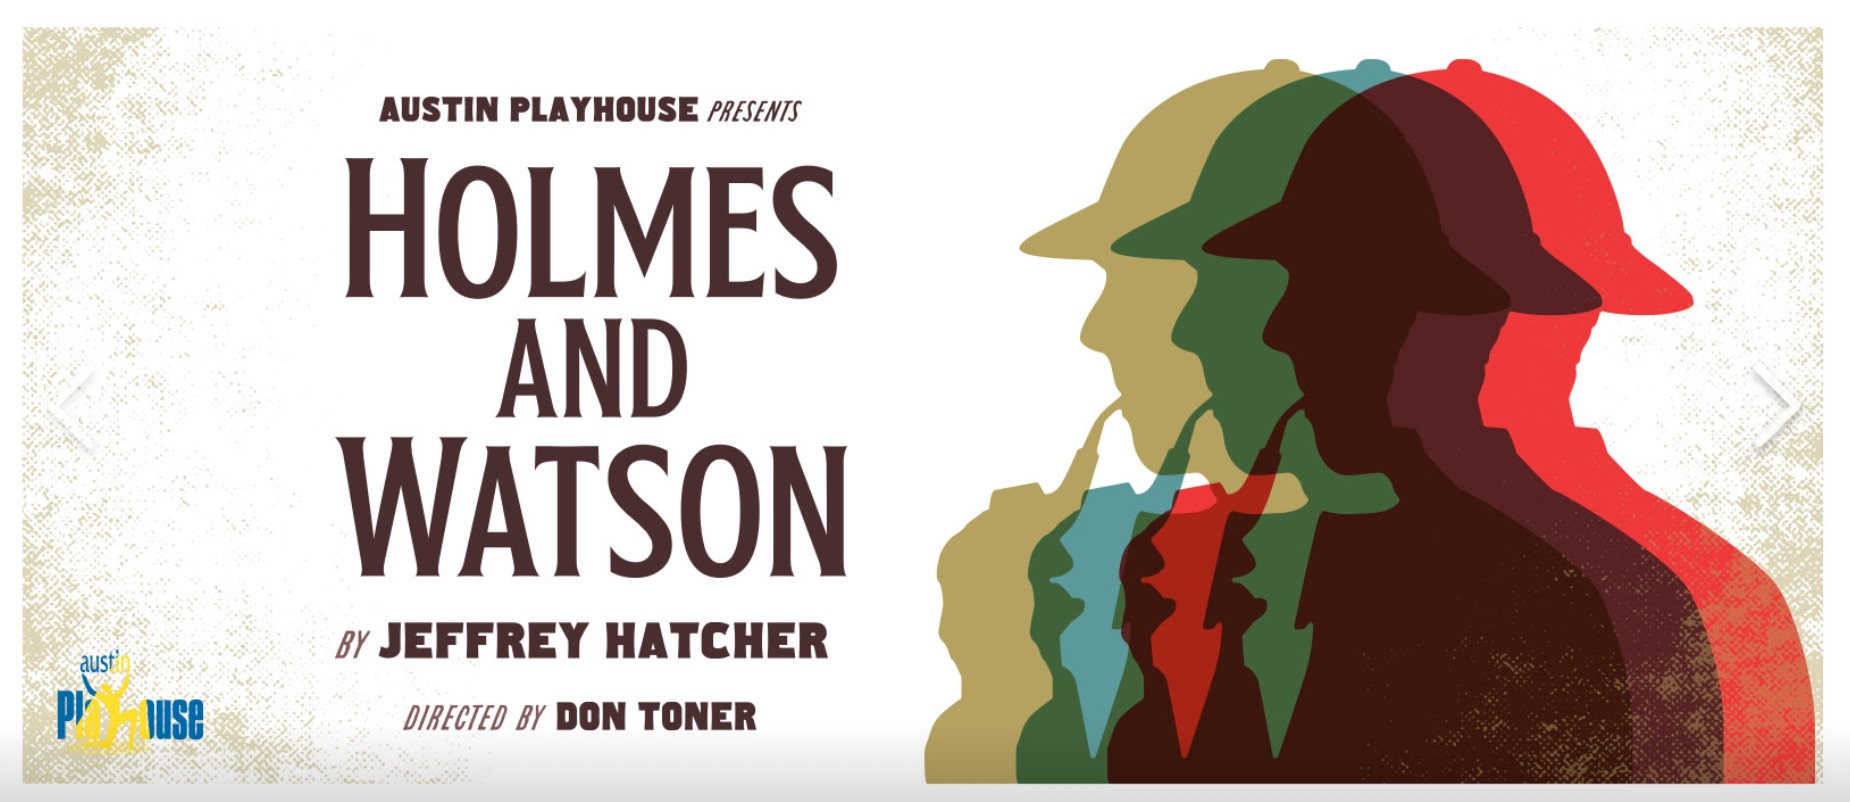 Holmes and Watson by Austin Playhouse